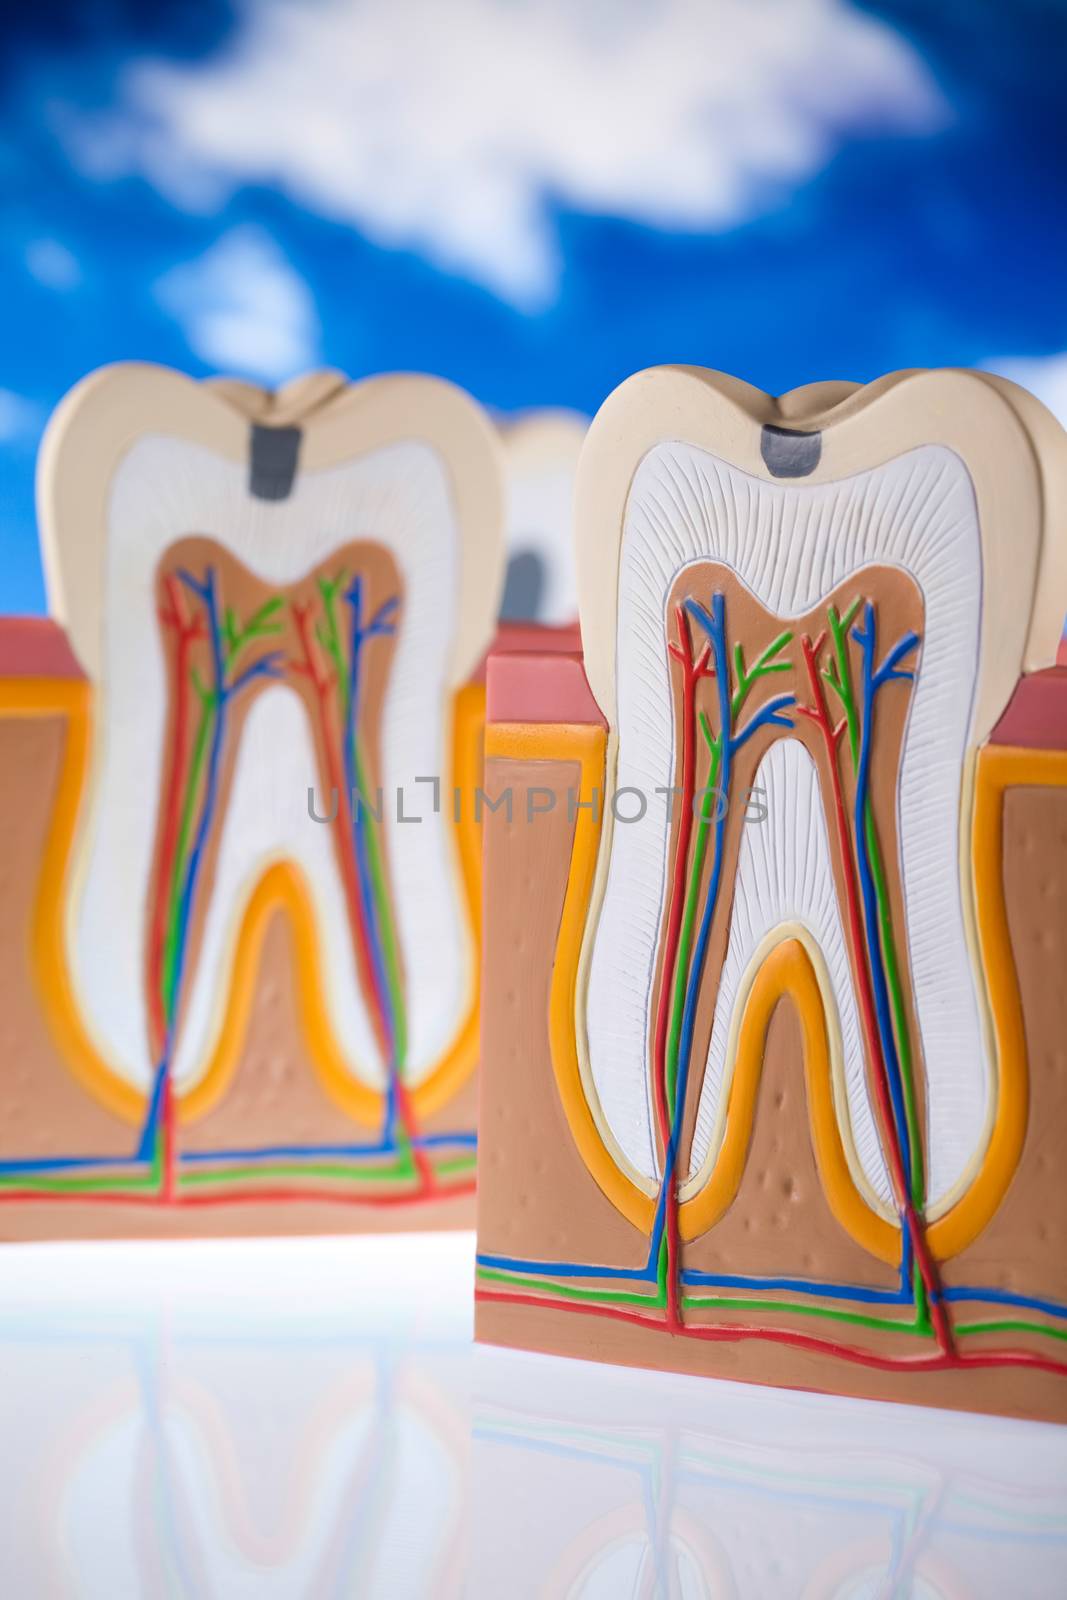 Tooth anatomy, bright colorful tone concept